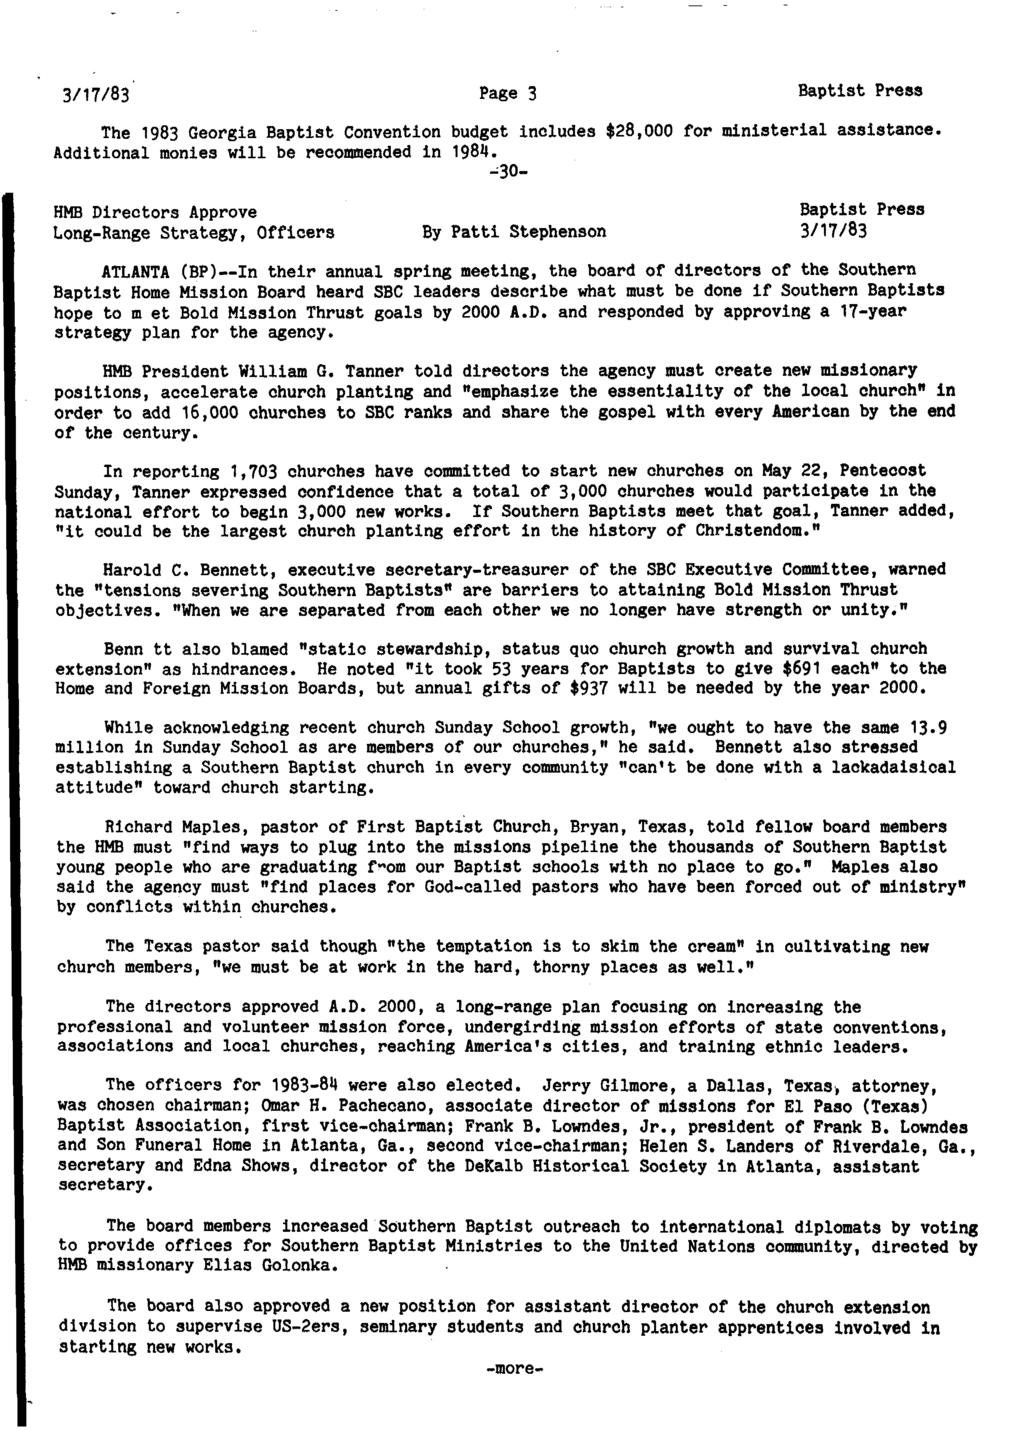 Page 3 The 1983 Georgia Baptist Convention budget includes $28,000 for ministerial assistance. Additional monies will be recommended in 1984.